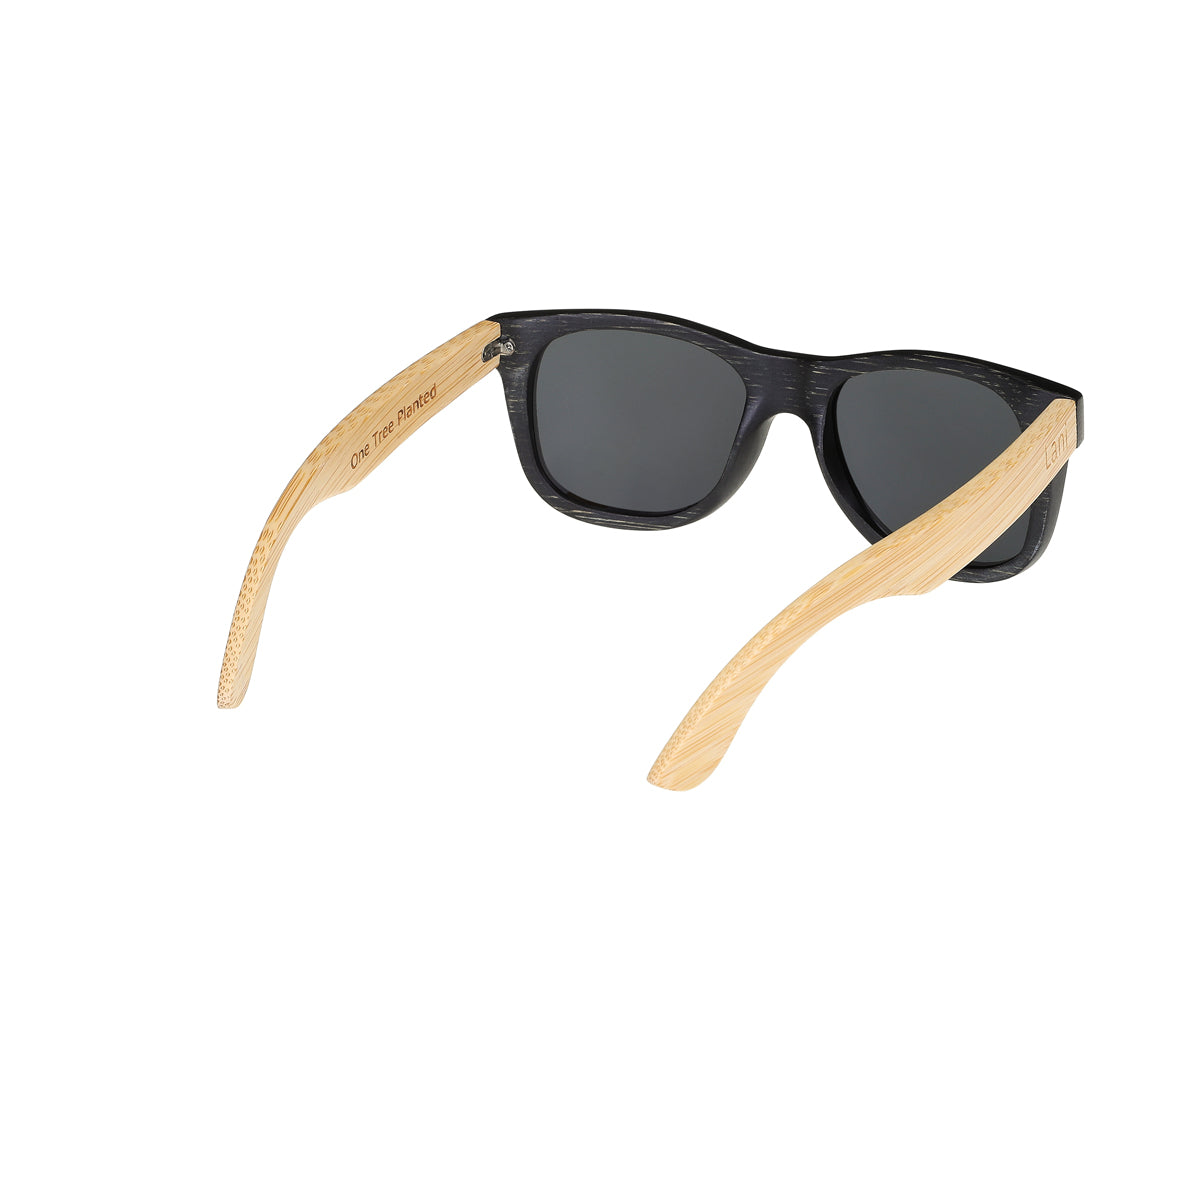 Be Different With Bamboo Glasses, discover the selection of